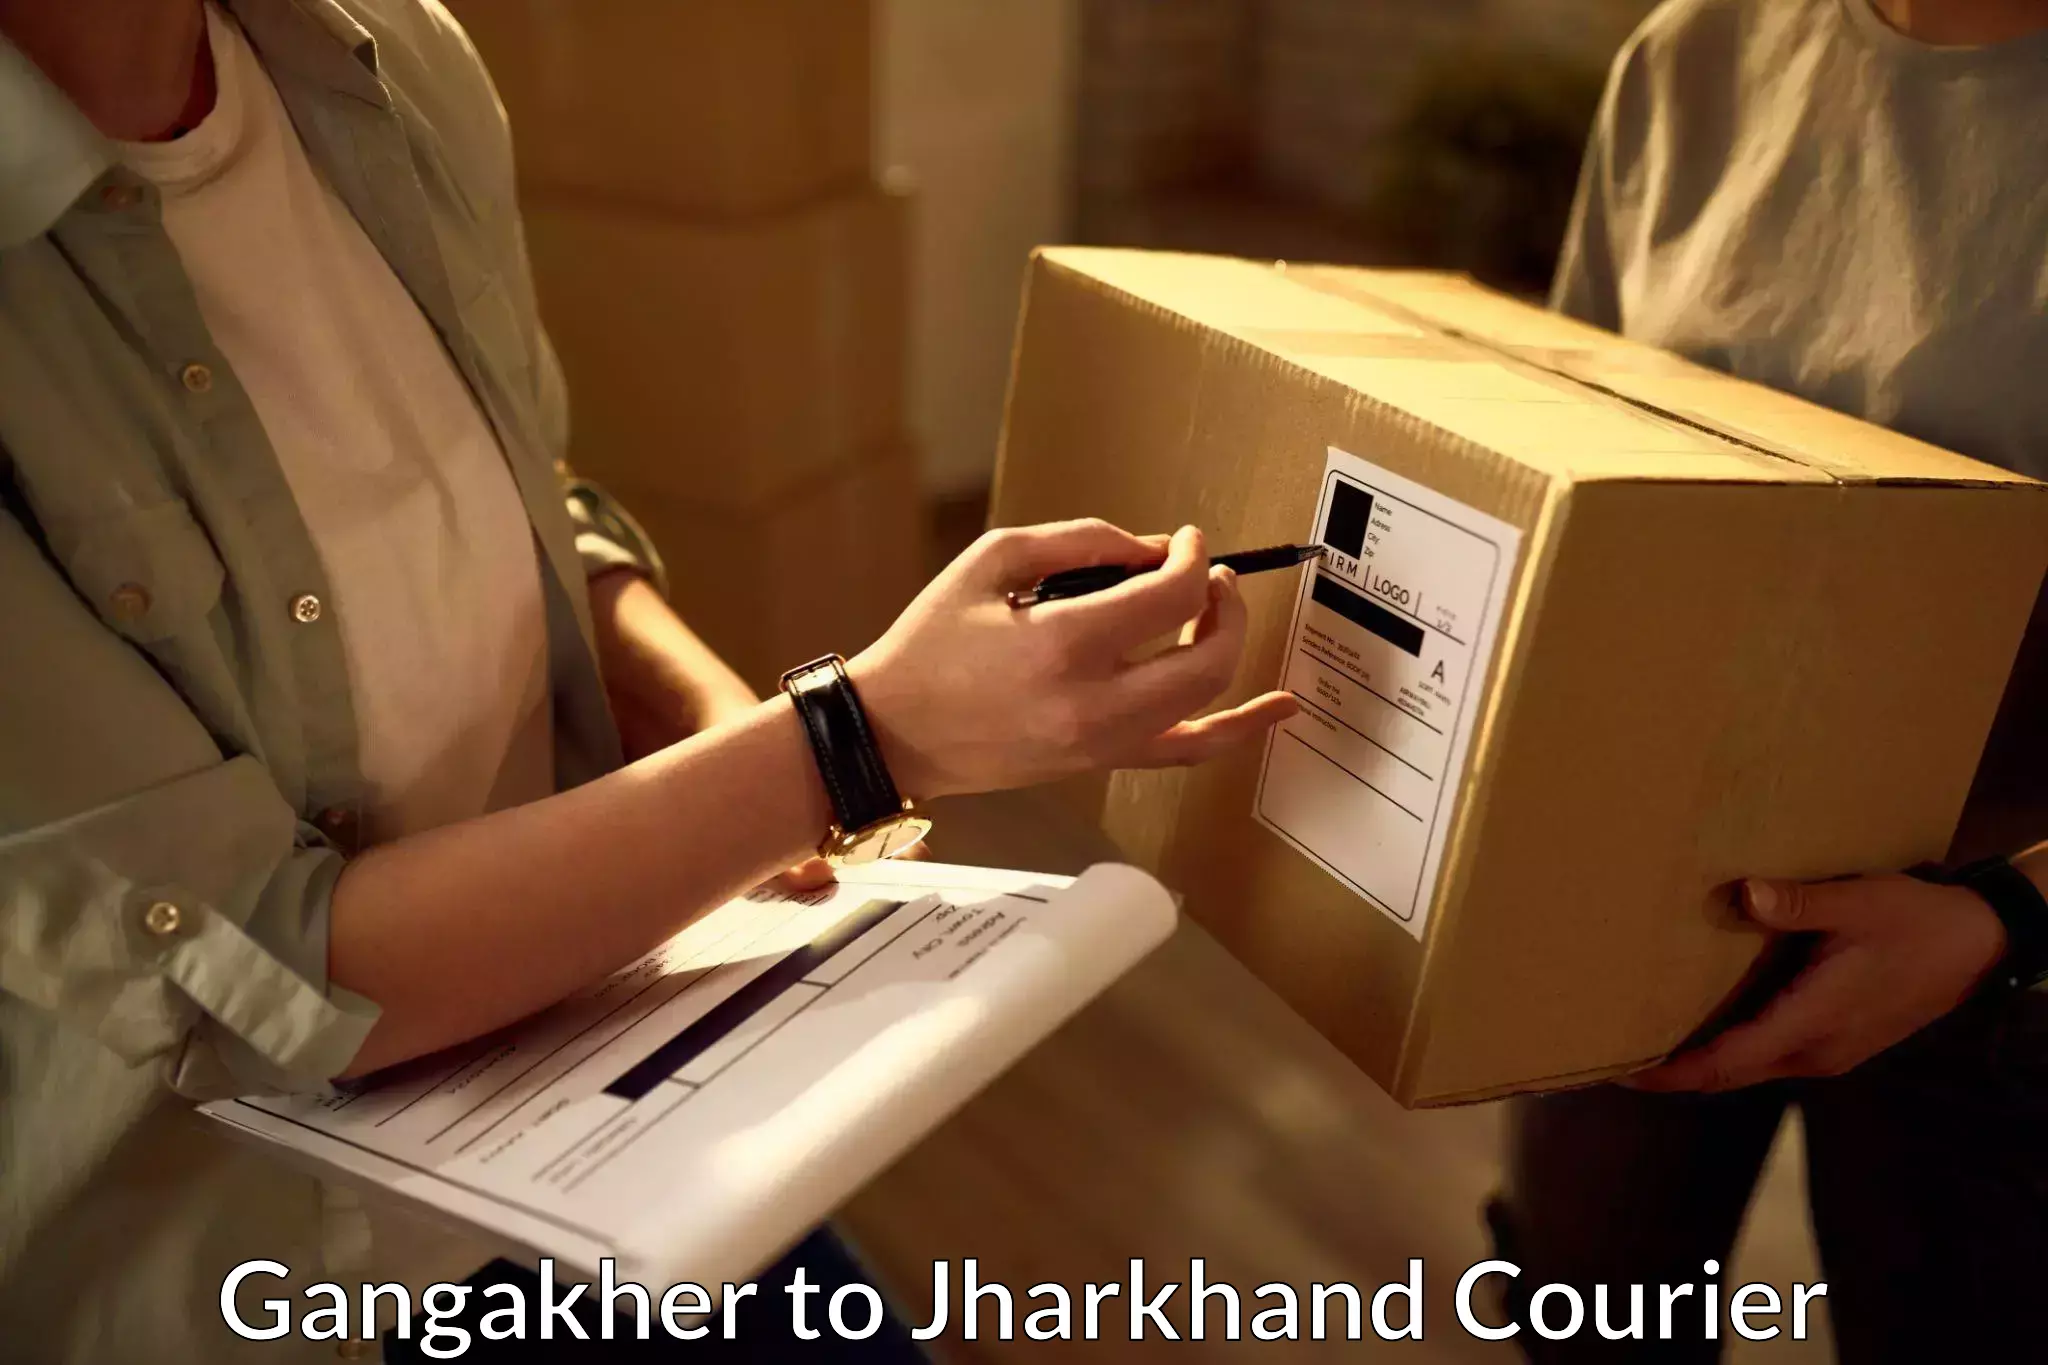 Cash on delivery service Gangakher to Chaibasa